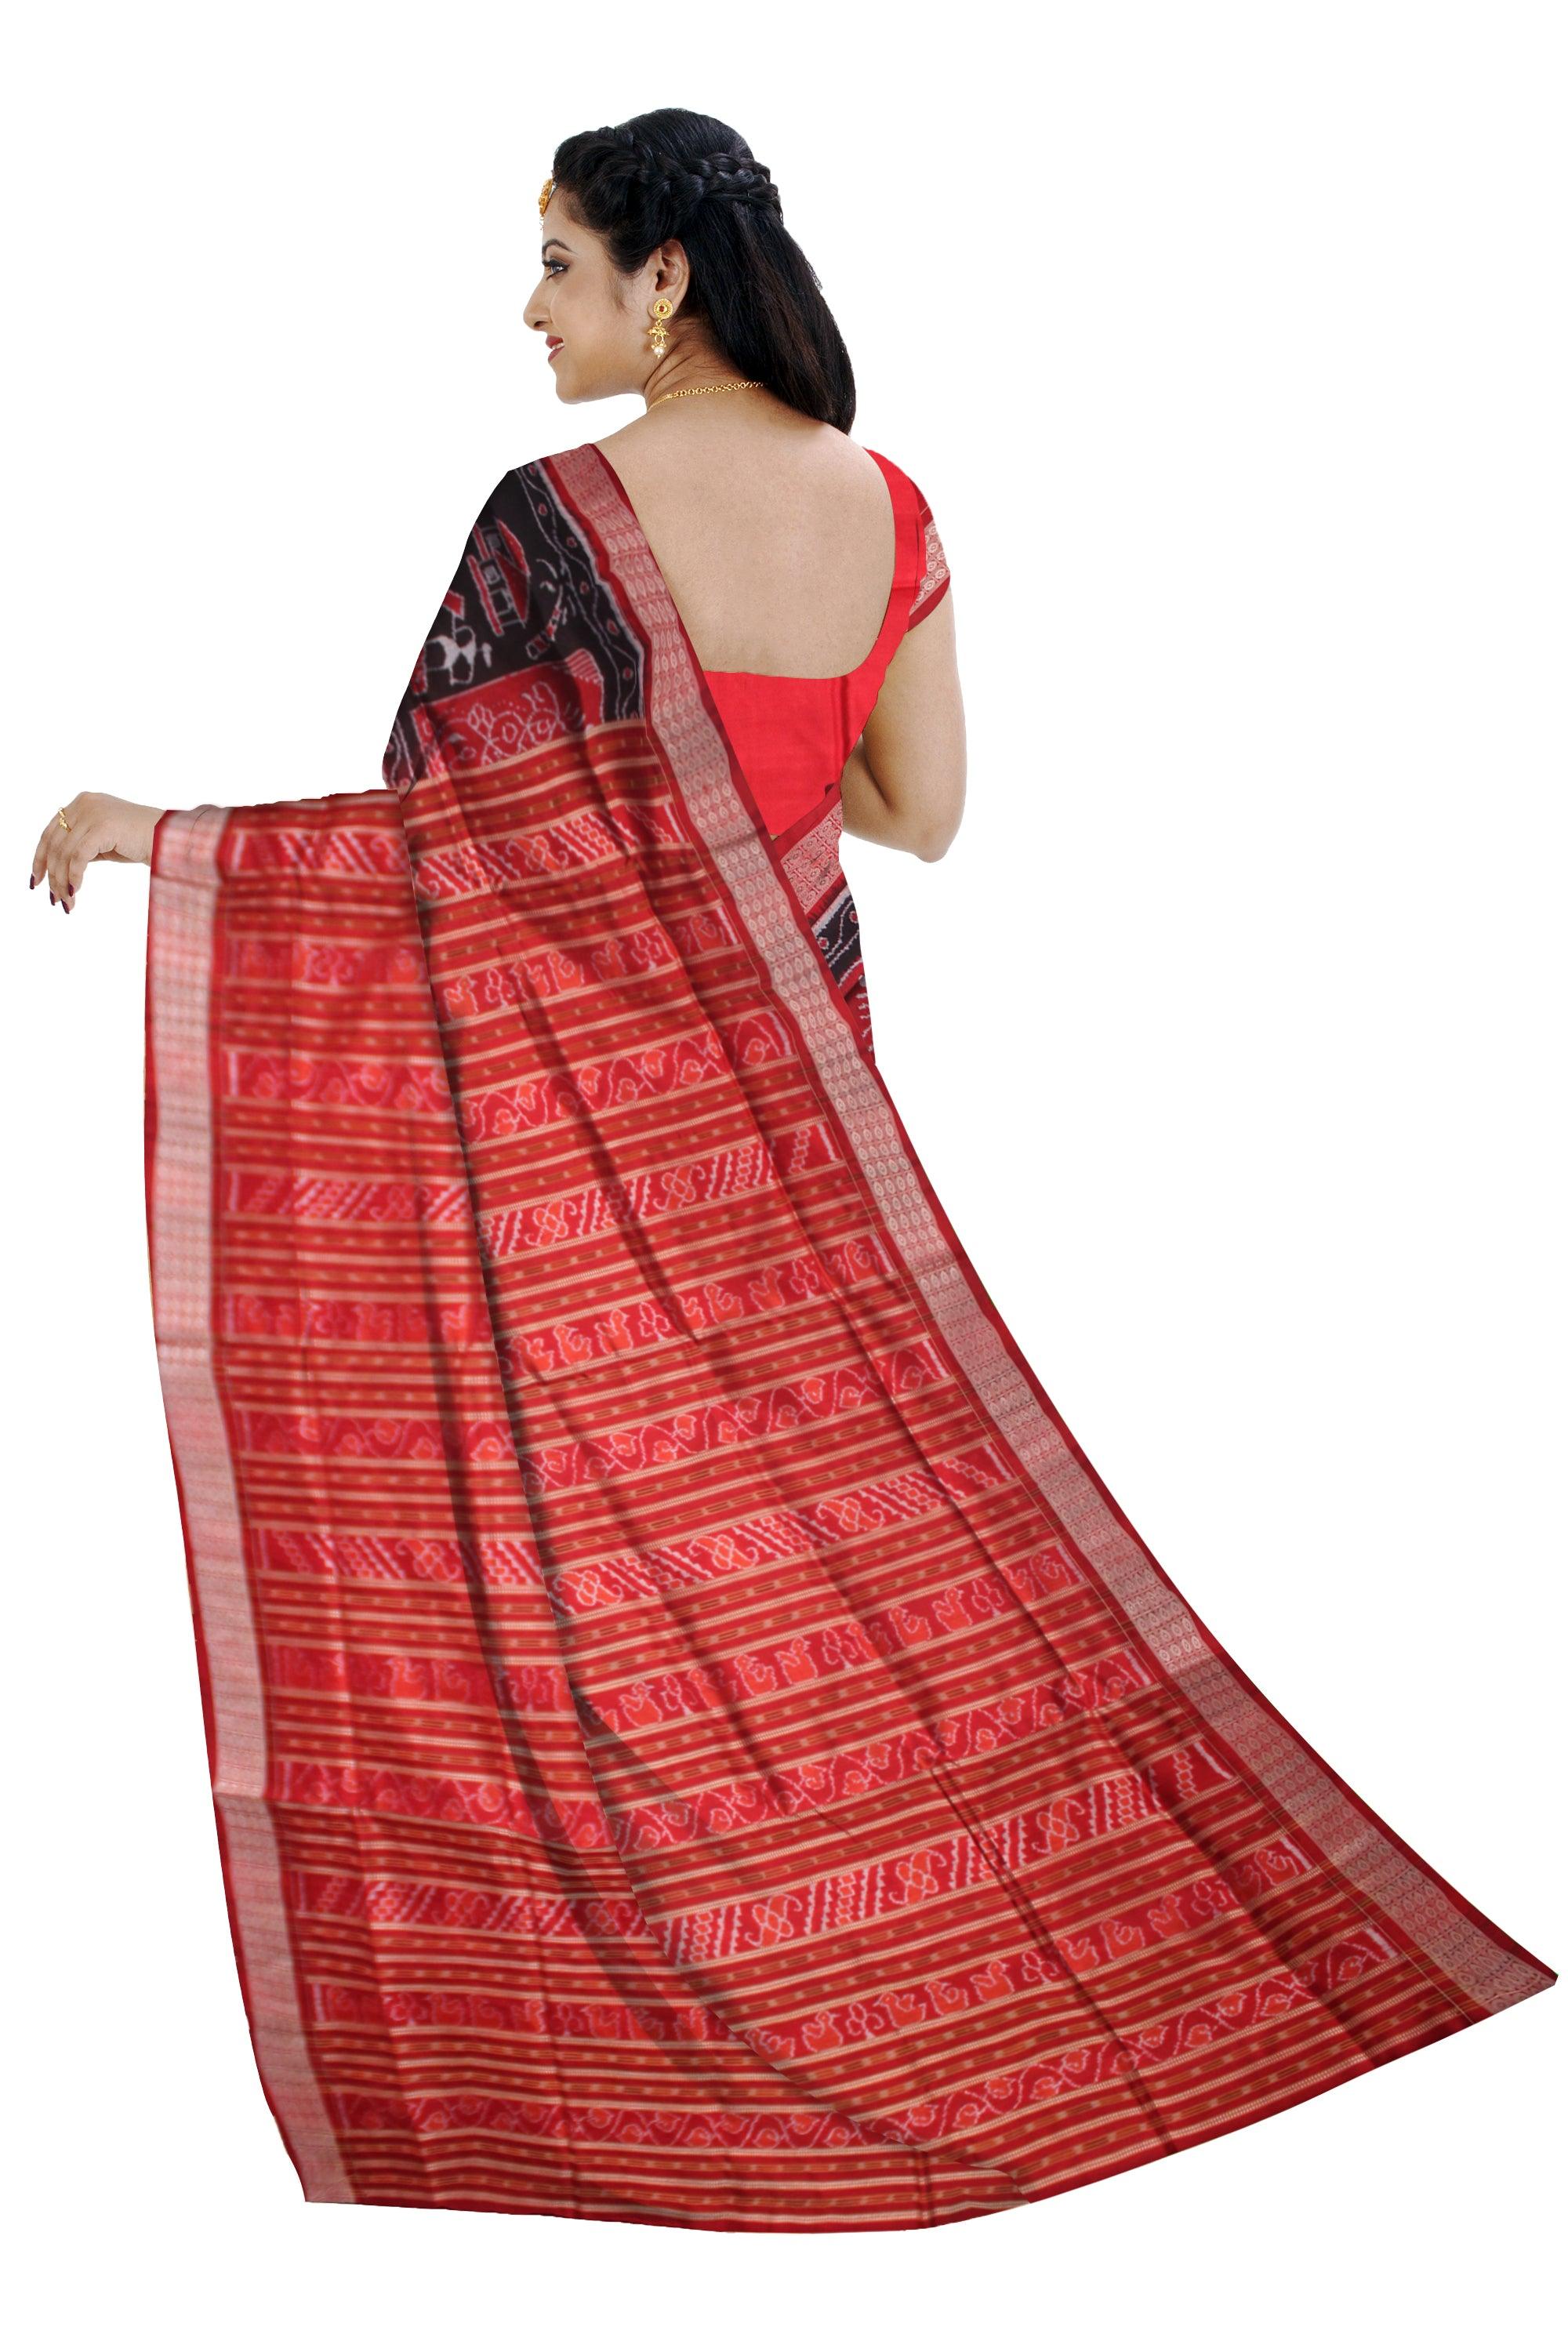 NEW LOOK SONEPUR PURE PATA SAREE IN RED AND BLACK COLOR WITH BLOUSE PIECE. - Koshali Arts & Crafts Enterprise